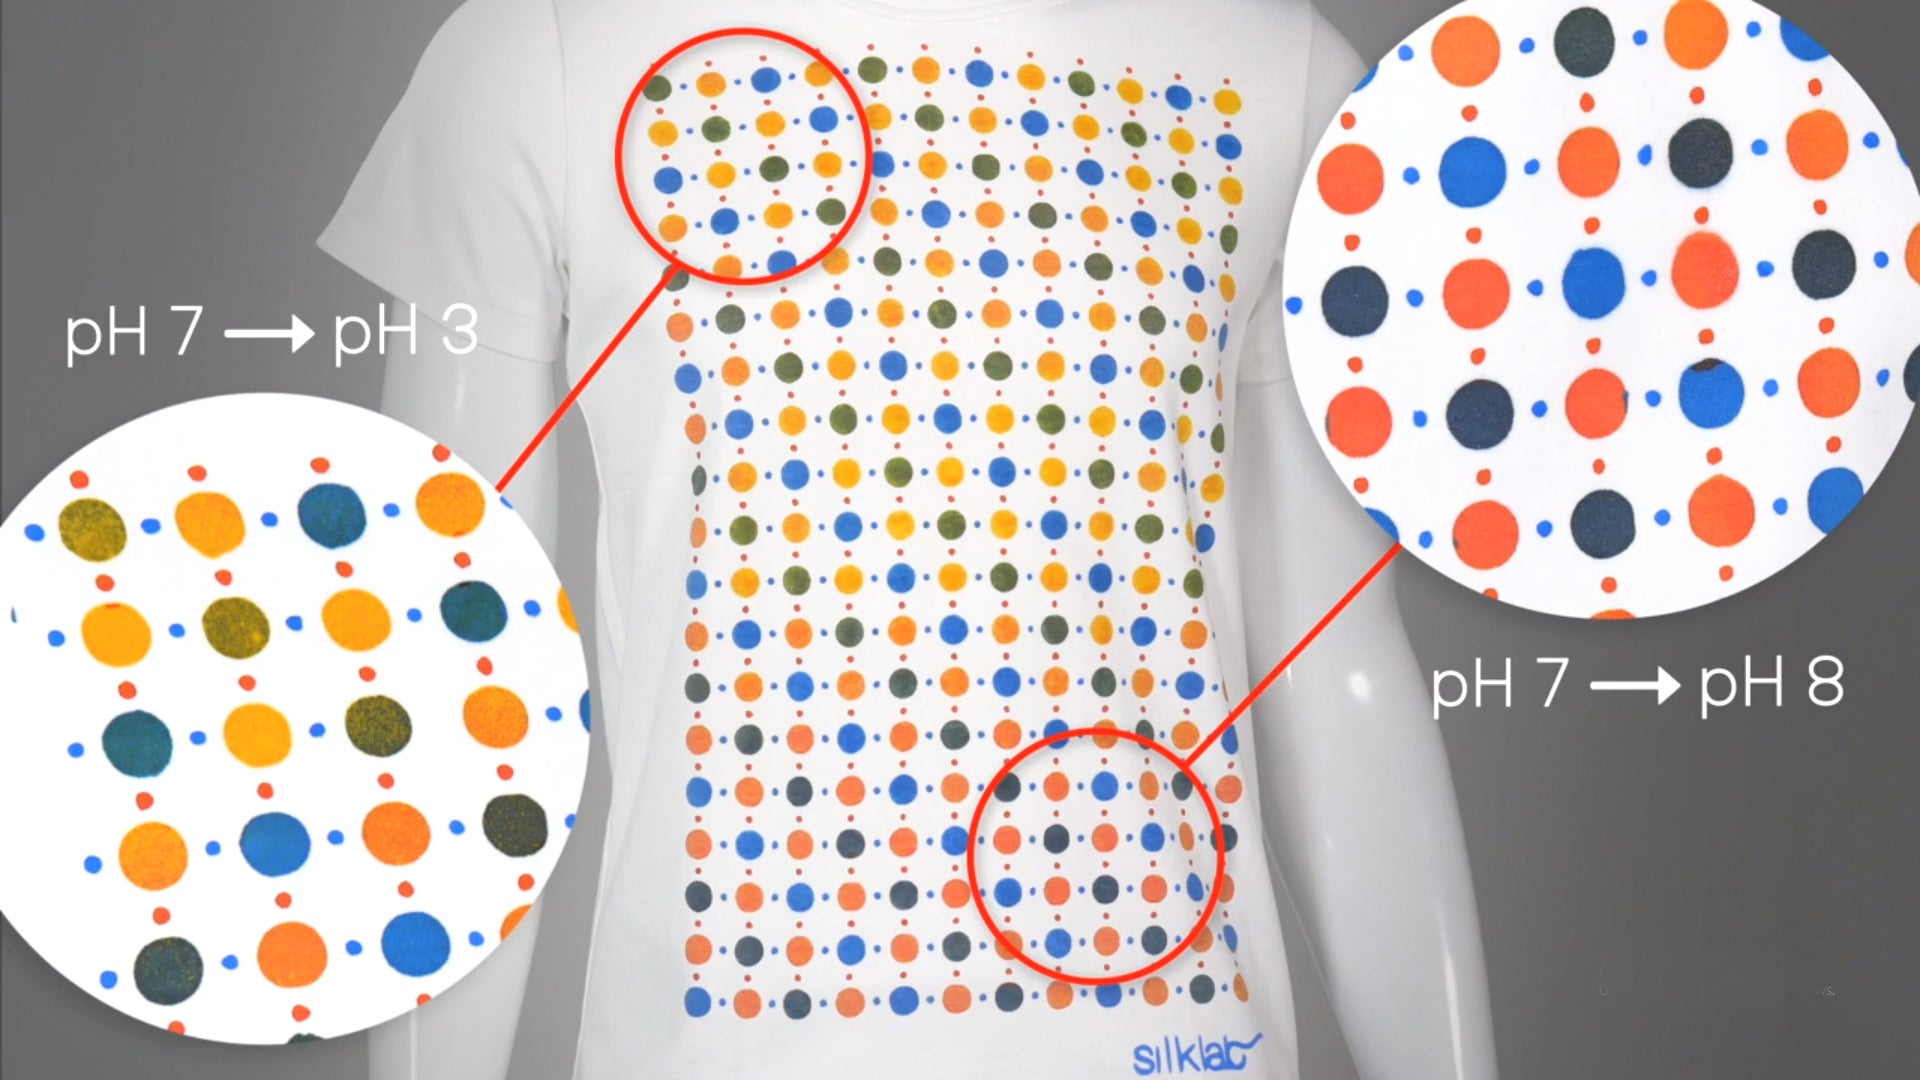 Color-Changing Ink Turns Clothes into Giant Chemical Sensors